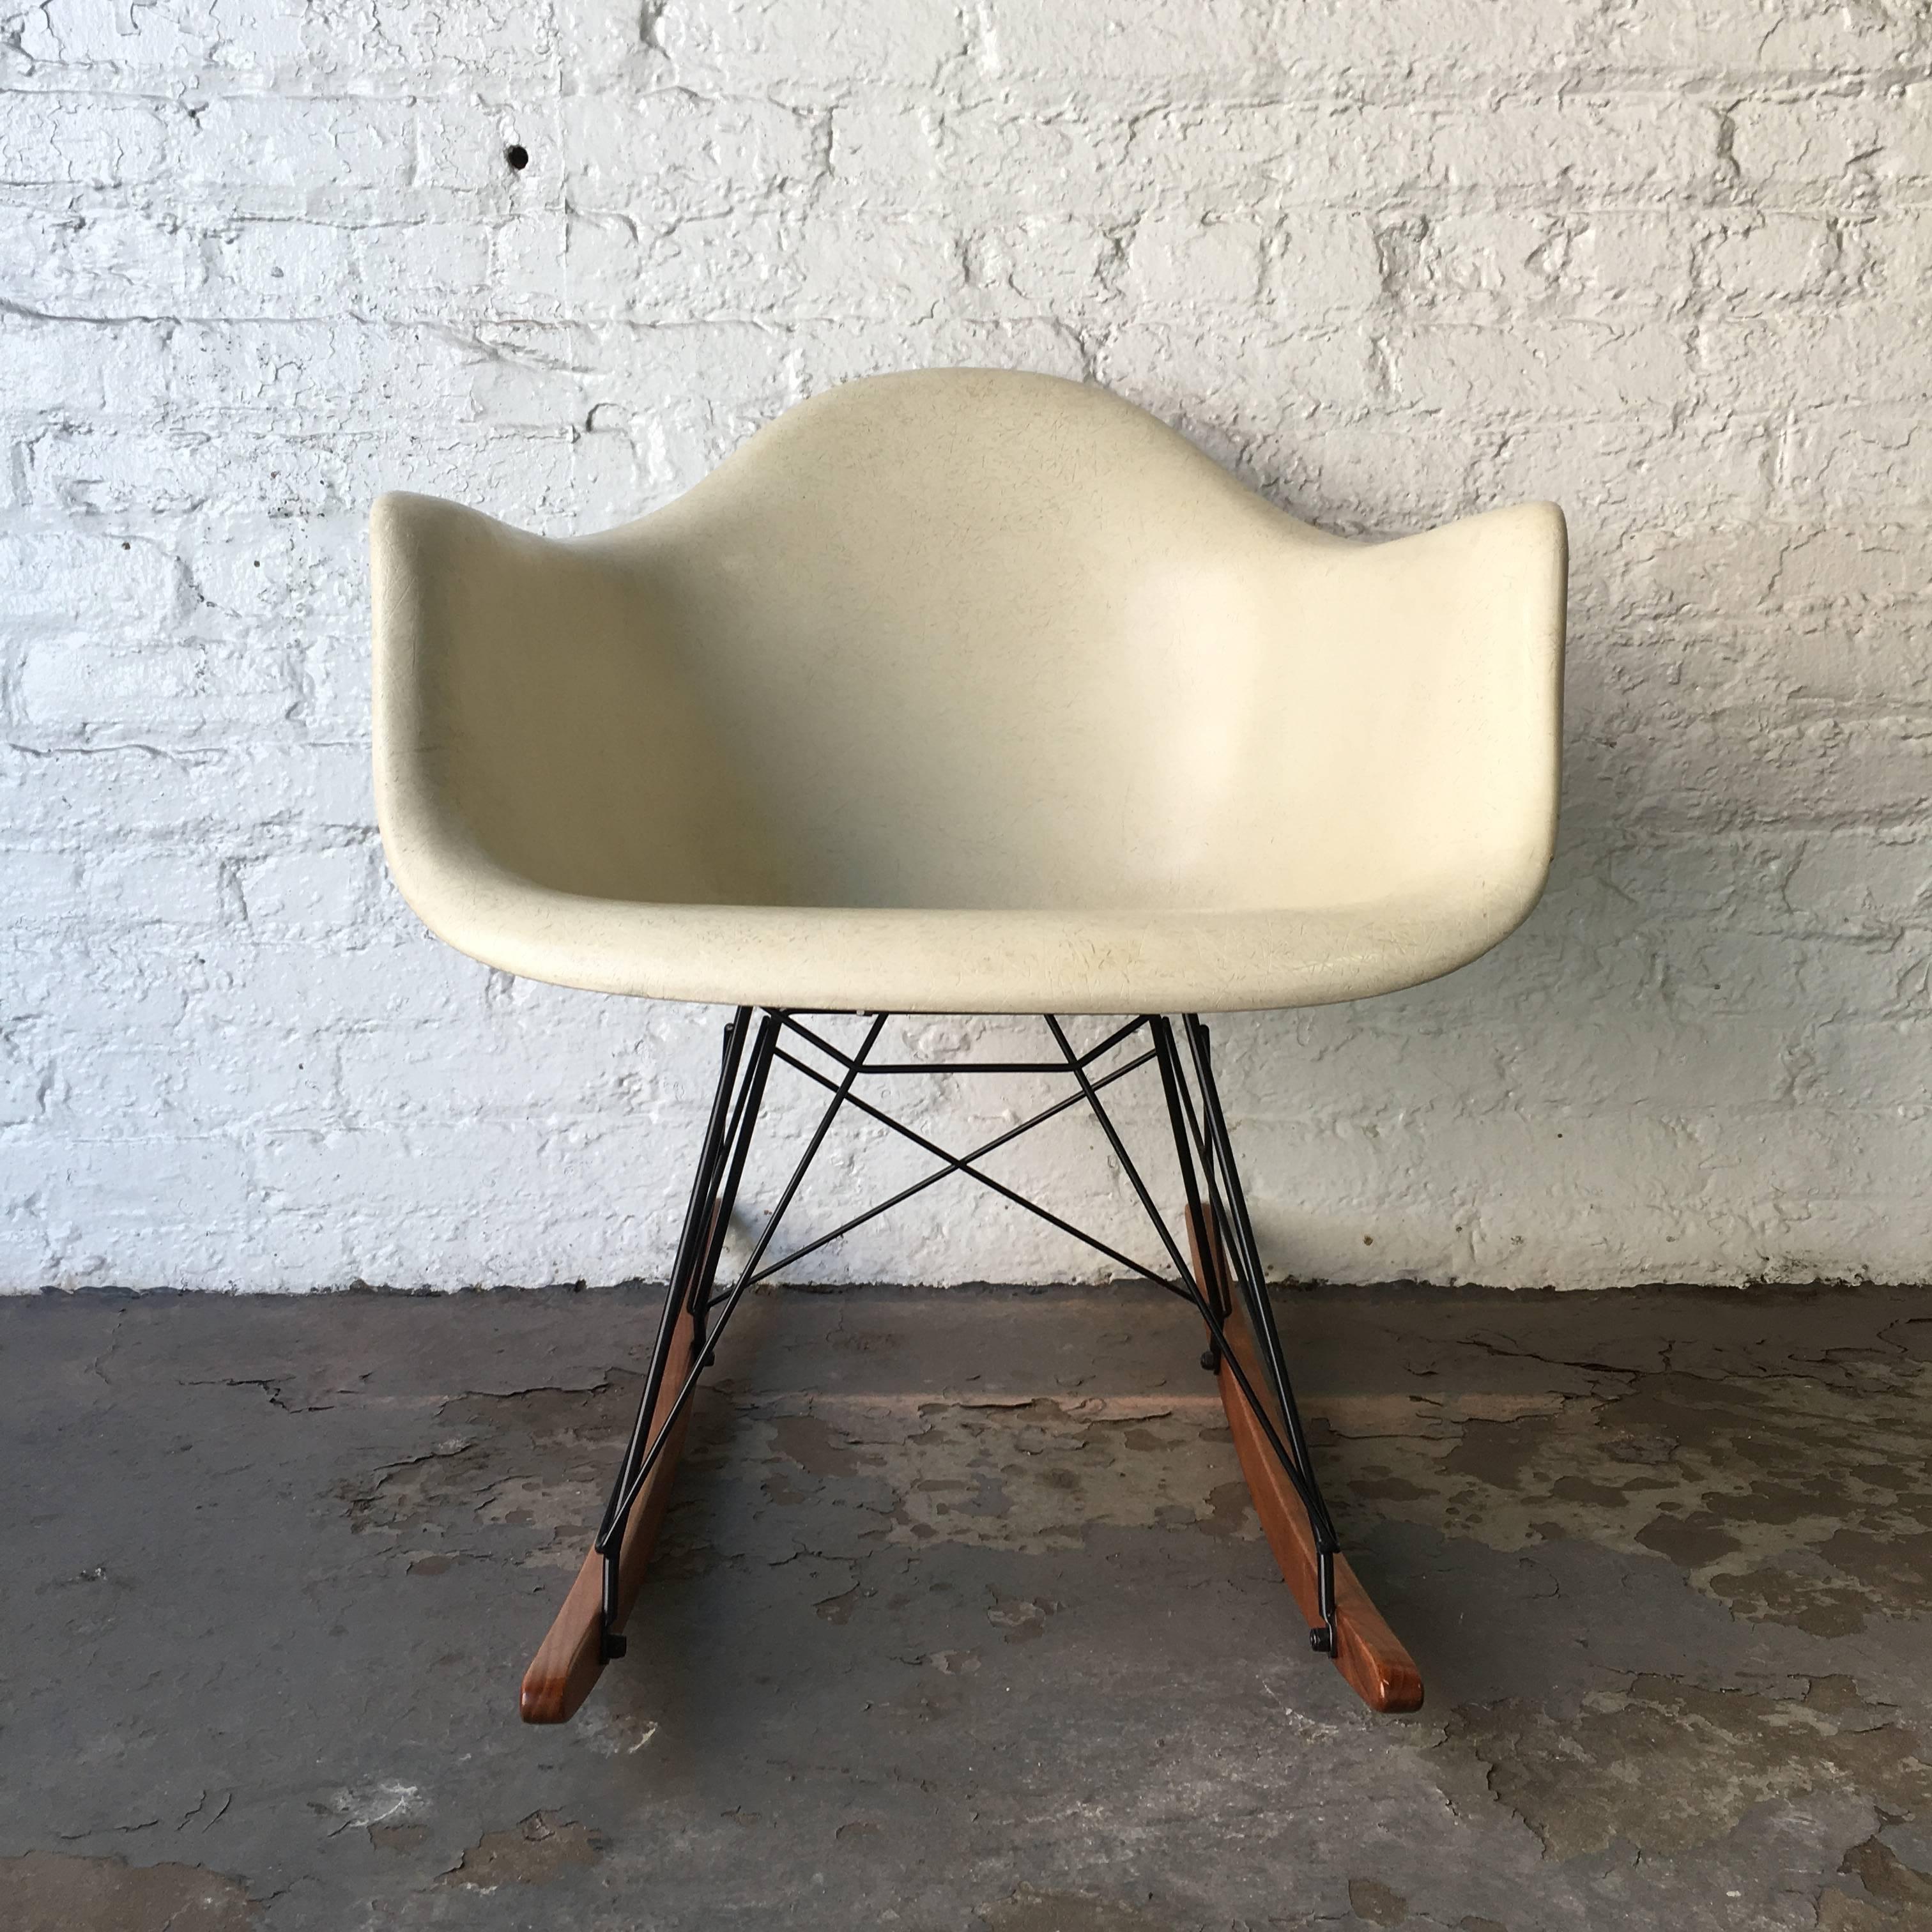 Herman Miller Eames fiberglass rocking chair in parchment. New base. Shell in excellent condition. Base in perfect condition.